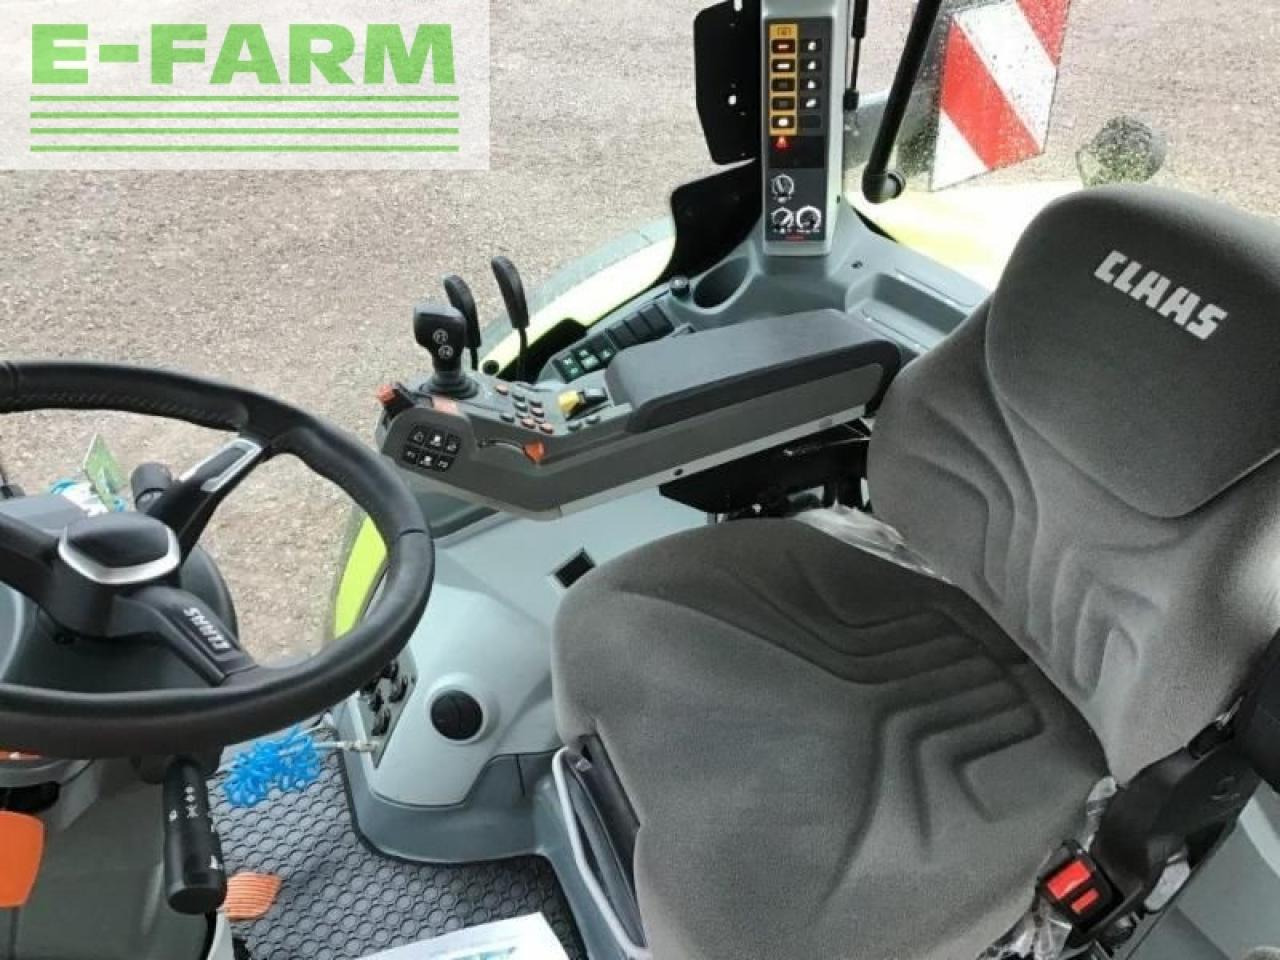 Tractor CLAAS arion 650 hexa stage v